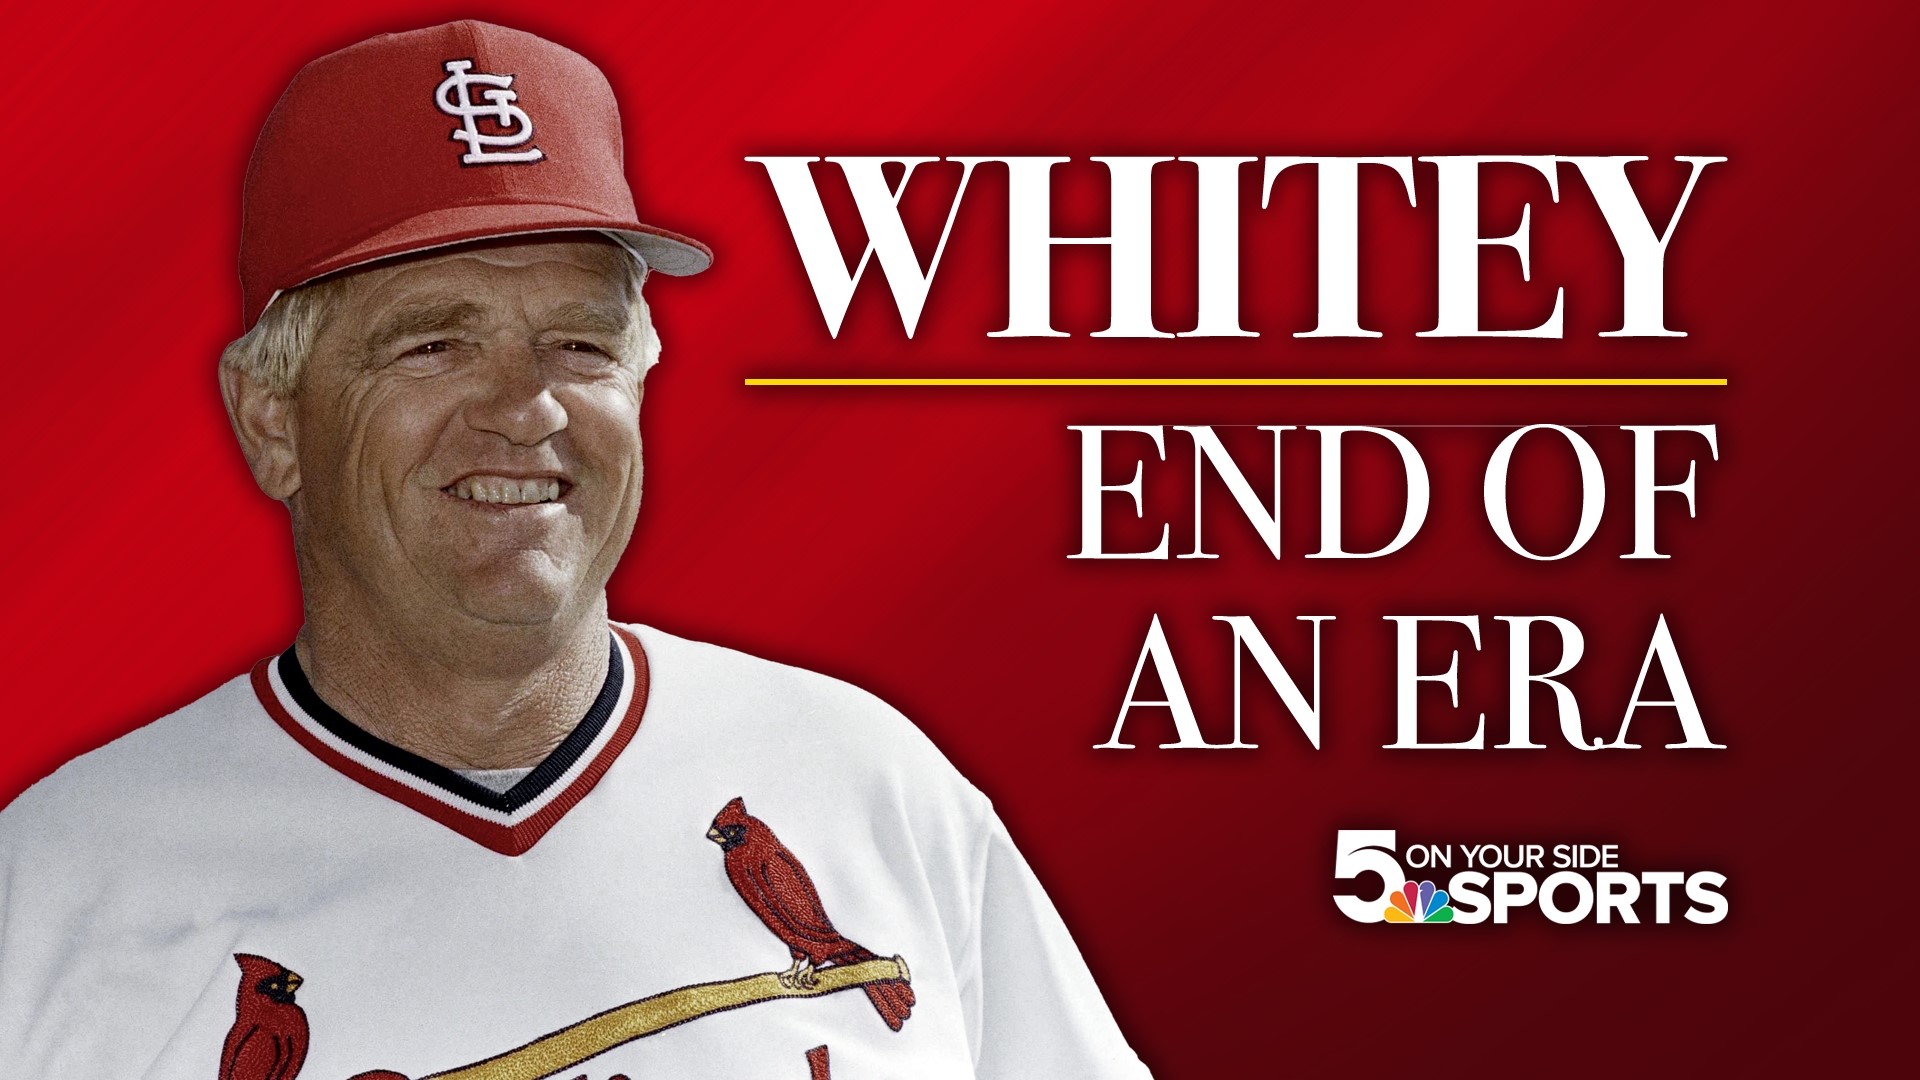 St. Louis Cardinals manager Whitey Herzog resigned from the team in July 1990. Join Mike Bush and guests for a look back at the White Rat's legacy with the Redbirds.